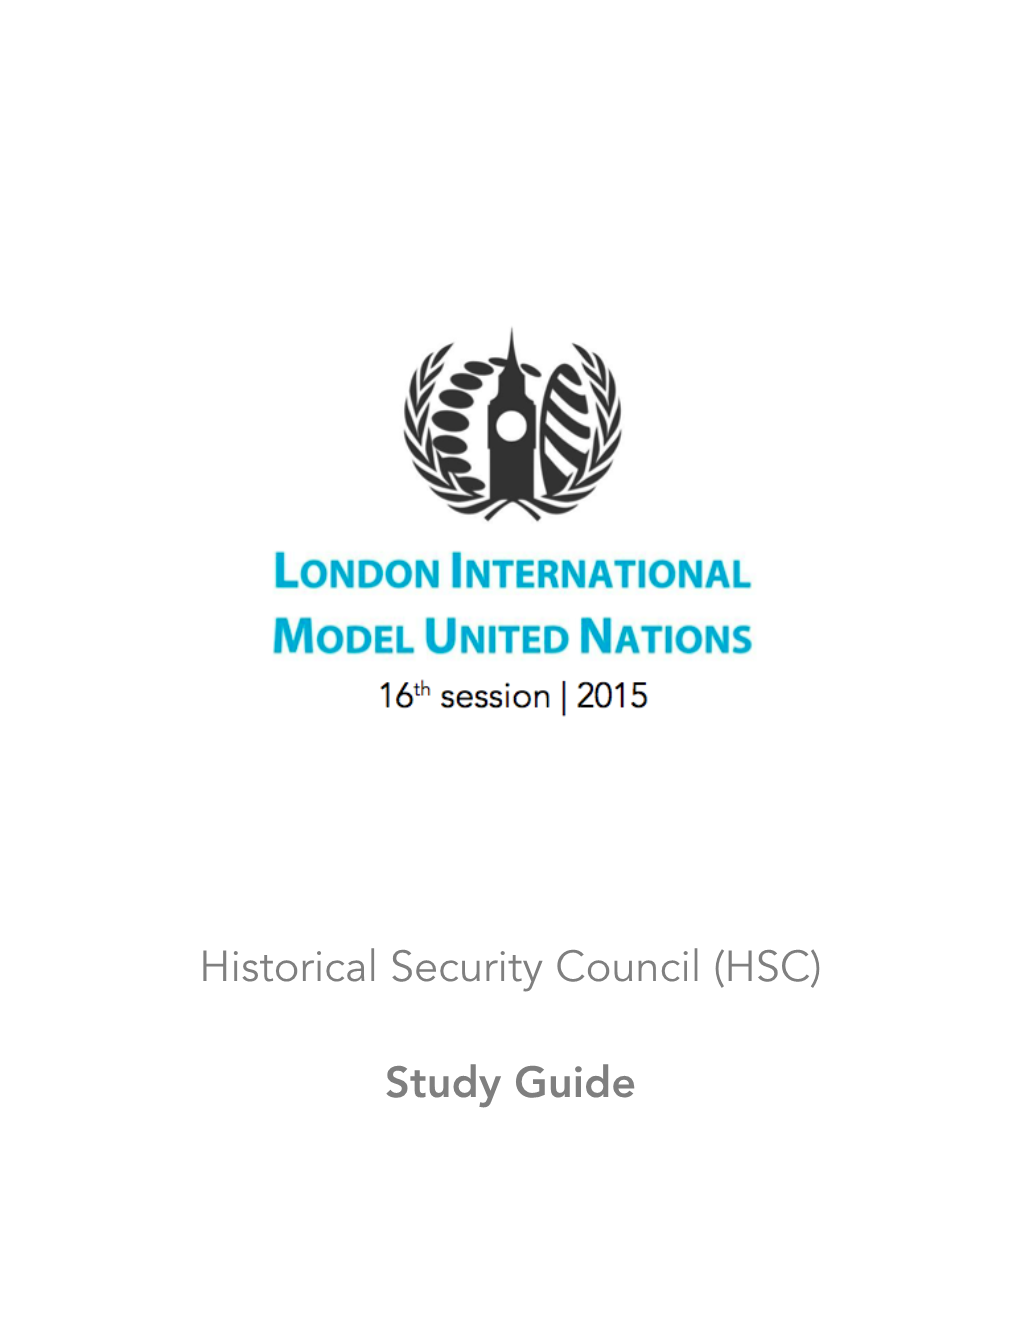 Historical Security Council (HSC) Study Guide